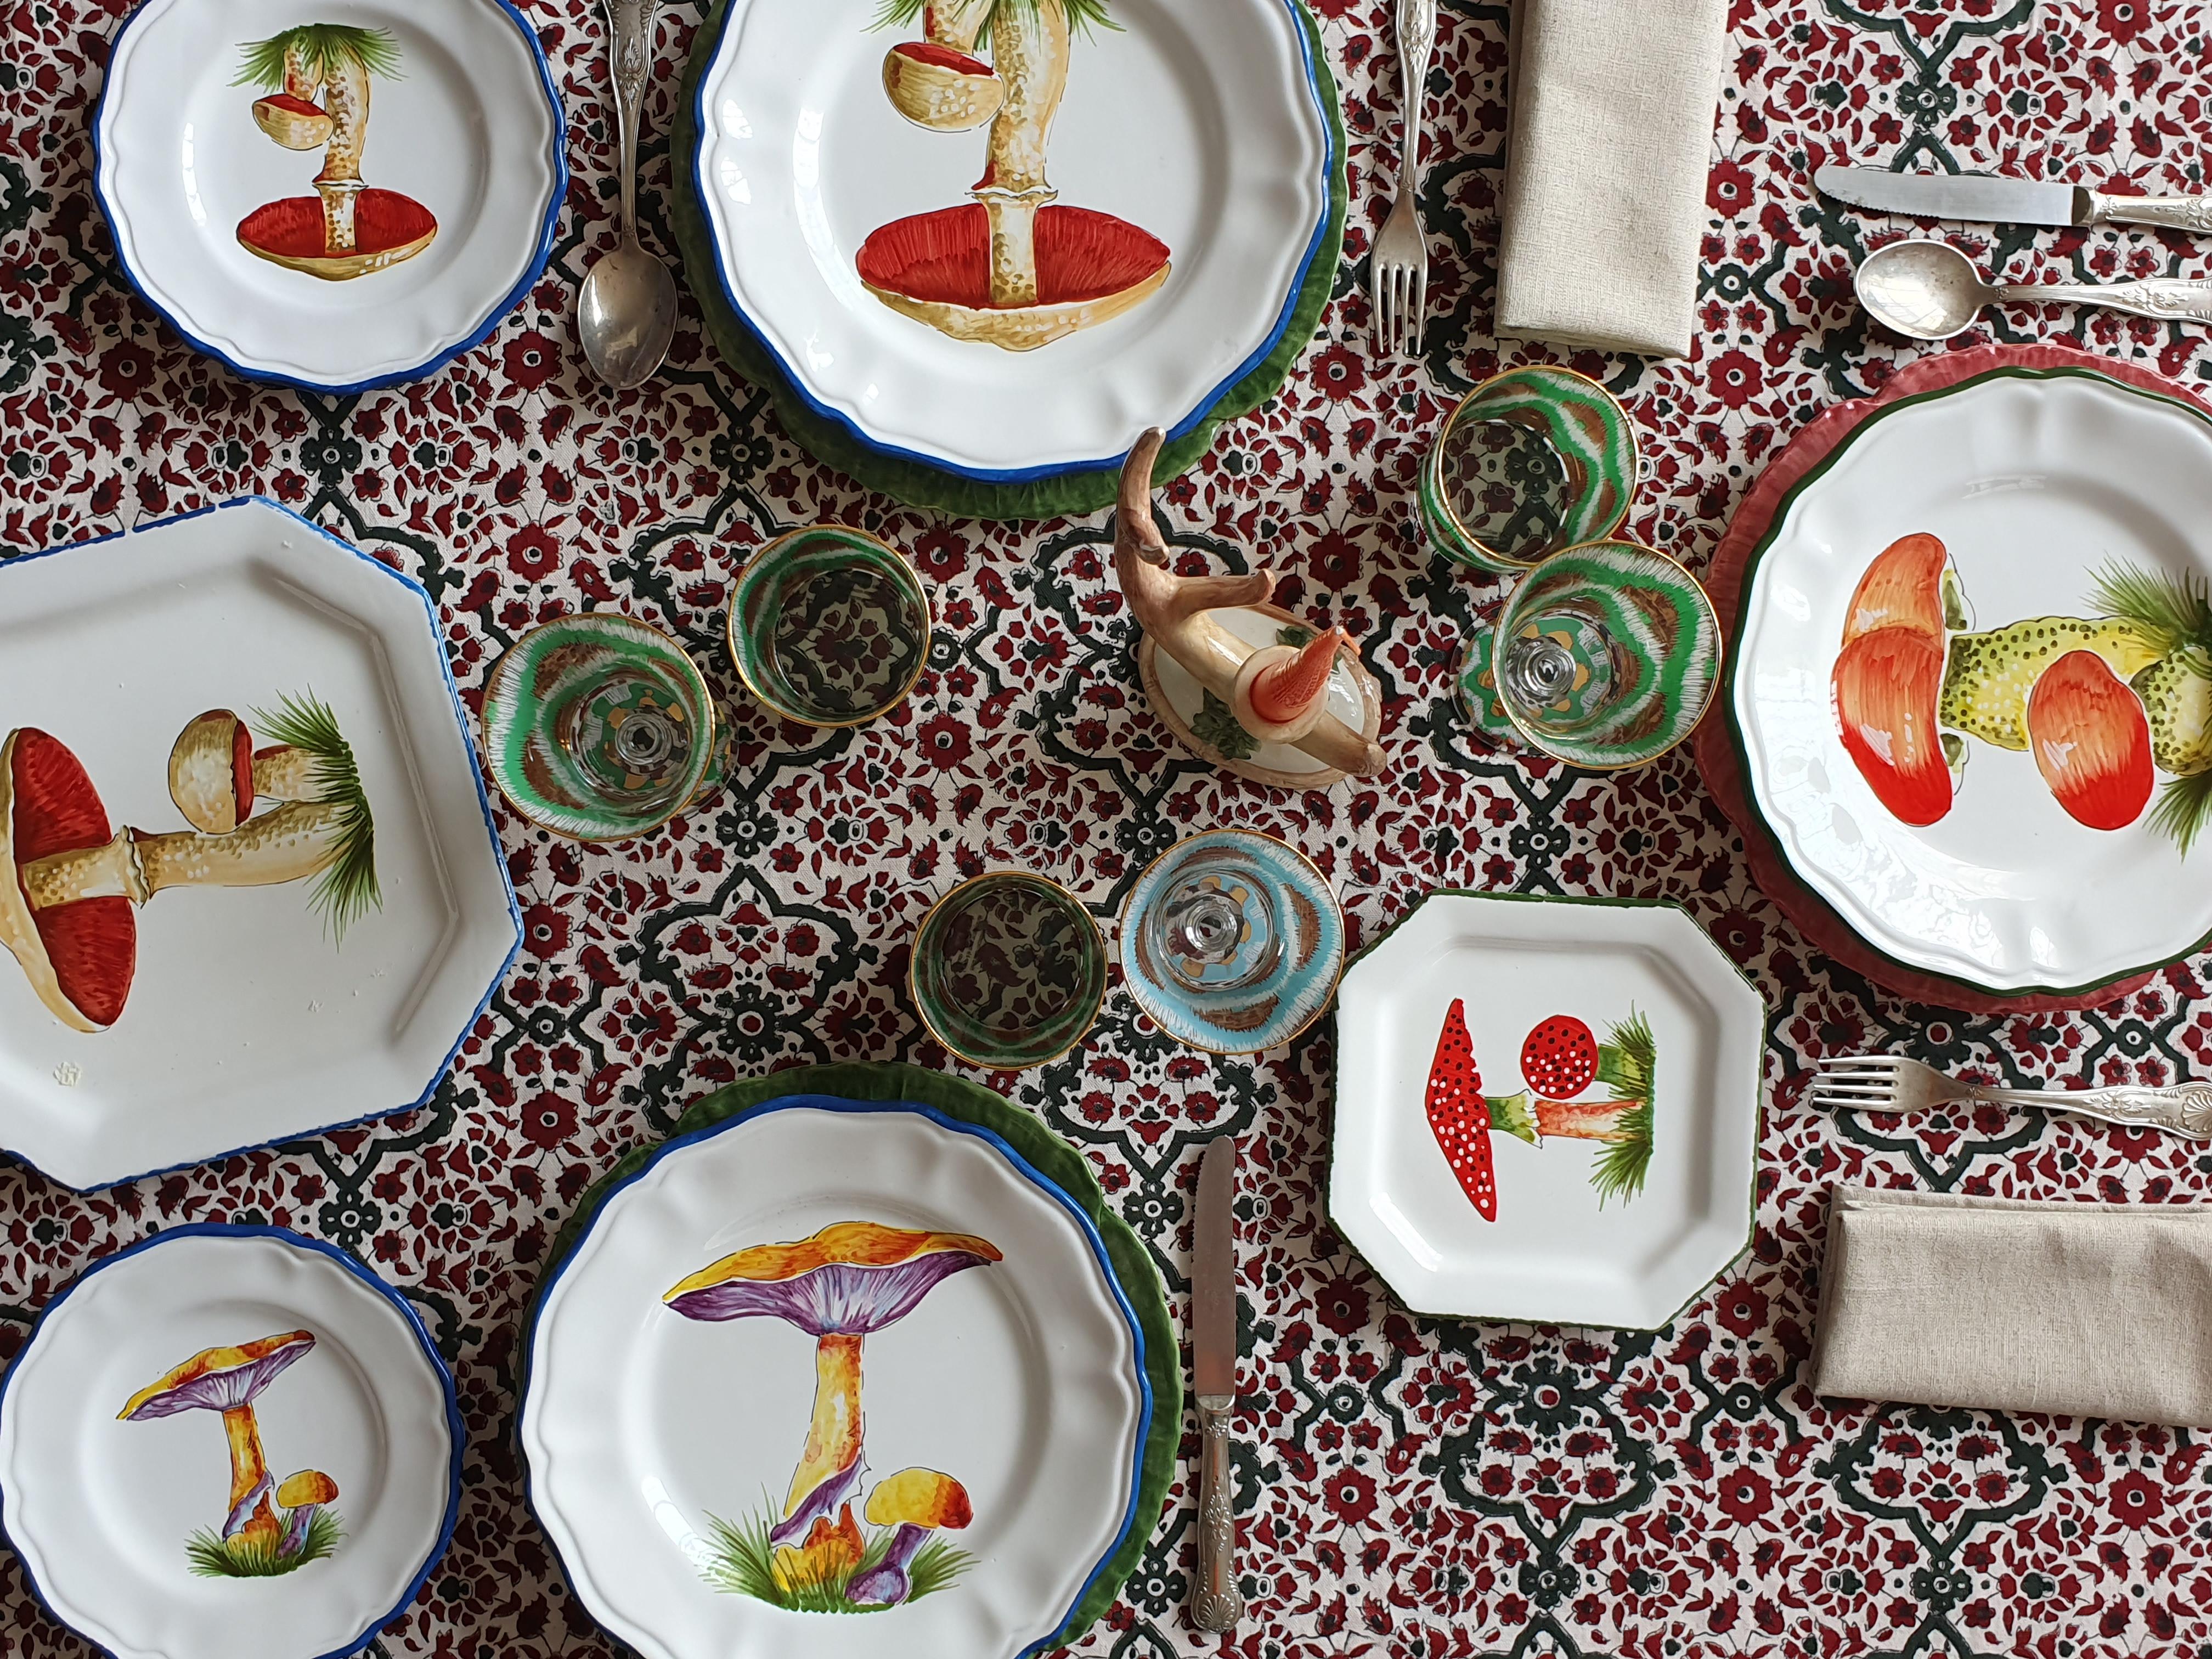 Italian craftsmanship meets Les-Ottomans in this beautifiul mushroom collection of handpainted plates
The charme of the woods on your table in a unique and special collection created by Bertrando Di Renzo and crafted by italian artisans